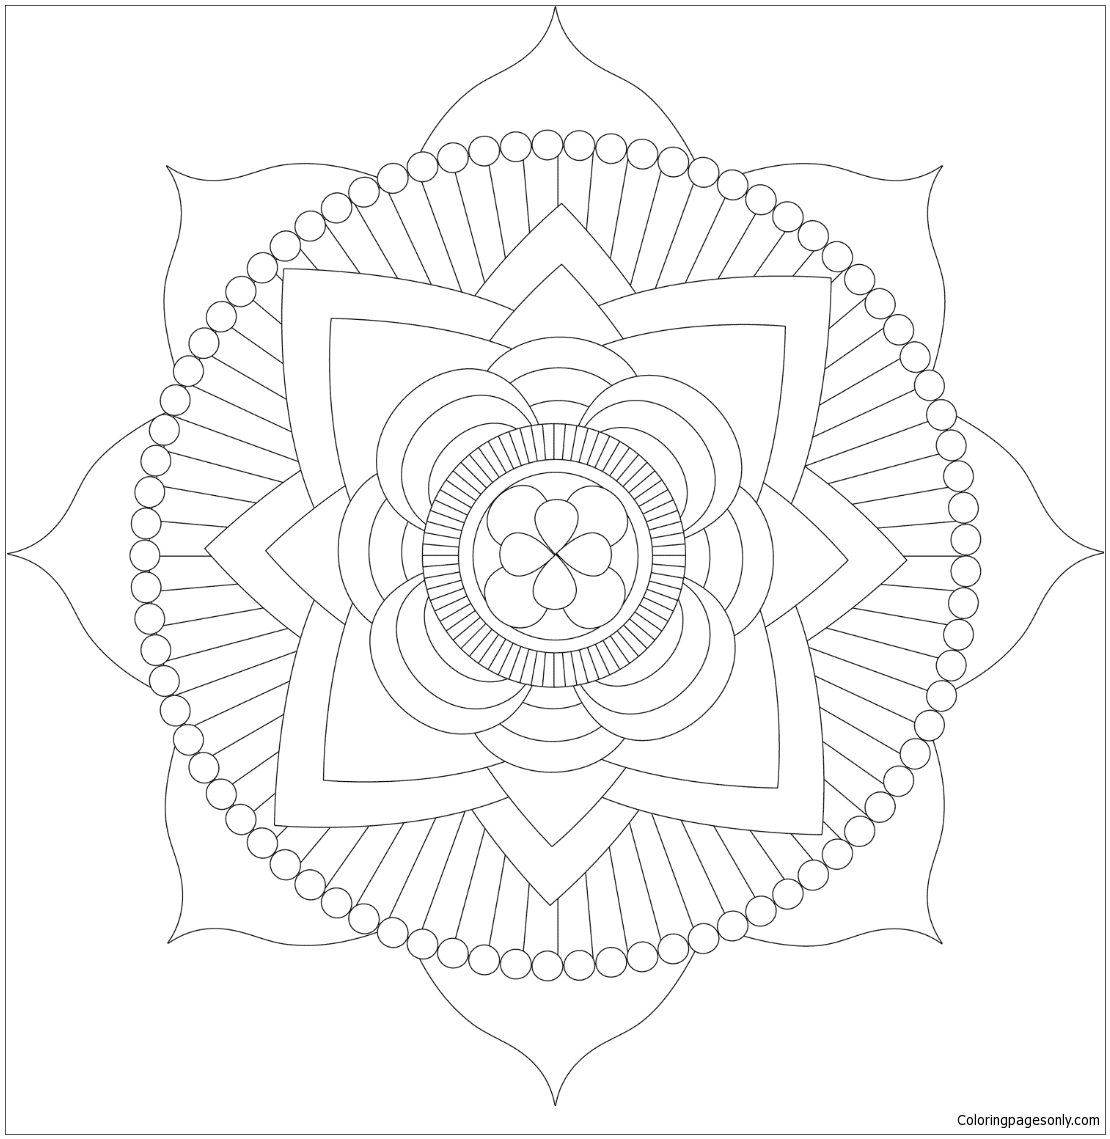 Lotus Mandala by Michelle Grewe Coloring Page